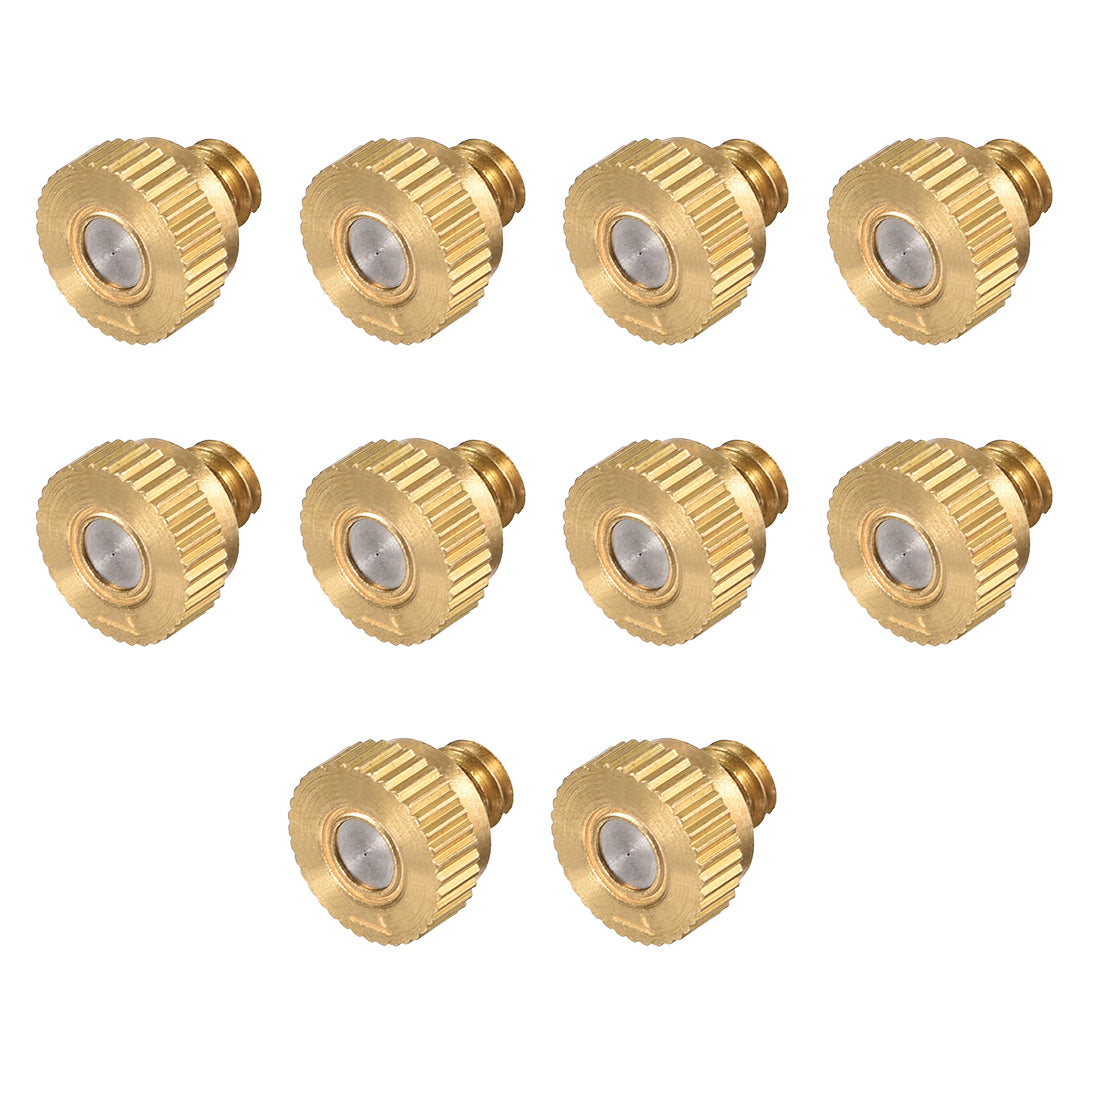 uxcell Uxcell Brass Misting Nozzle - 10/24 UNC 0.1mm Orifice Dia Replacement Heads for Outdoor Cooling System - 10 Pcs